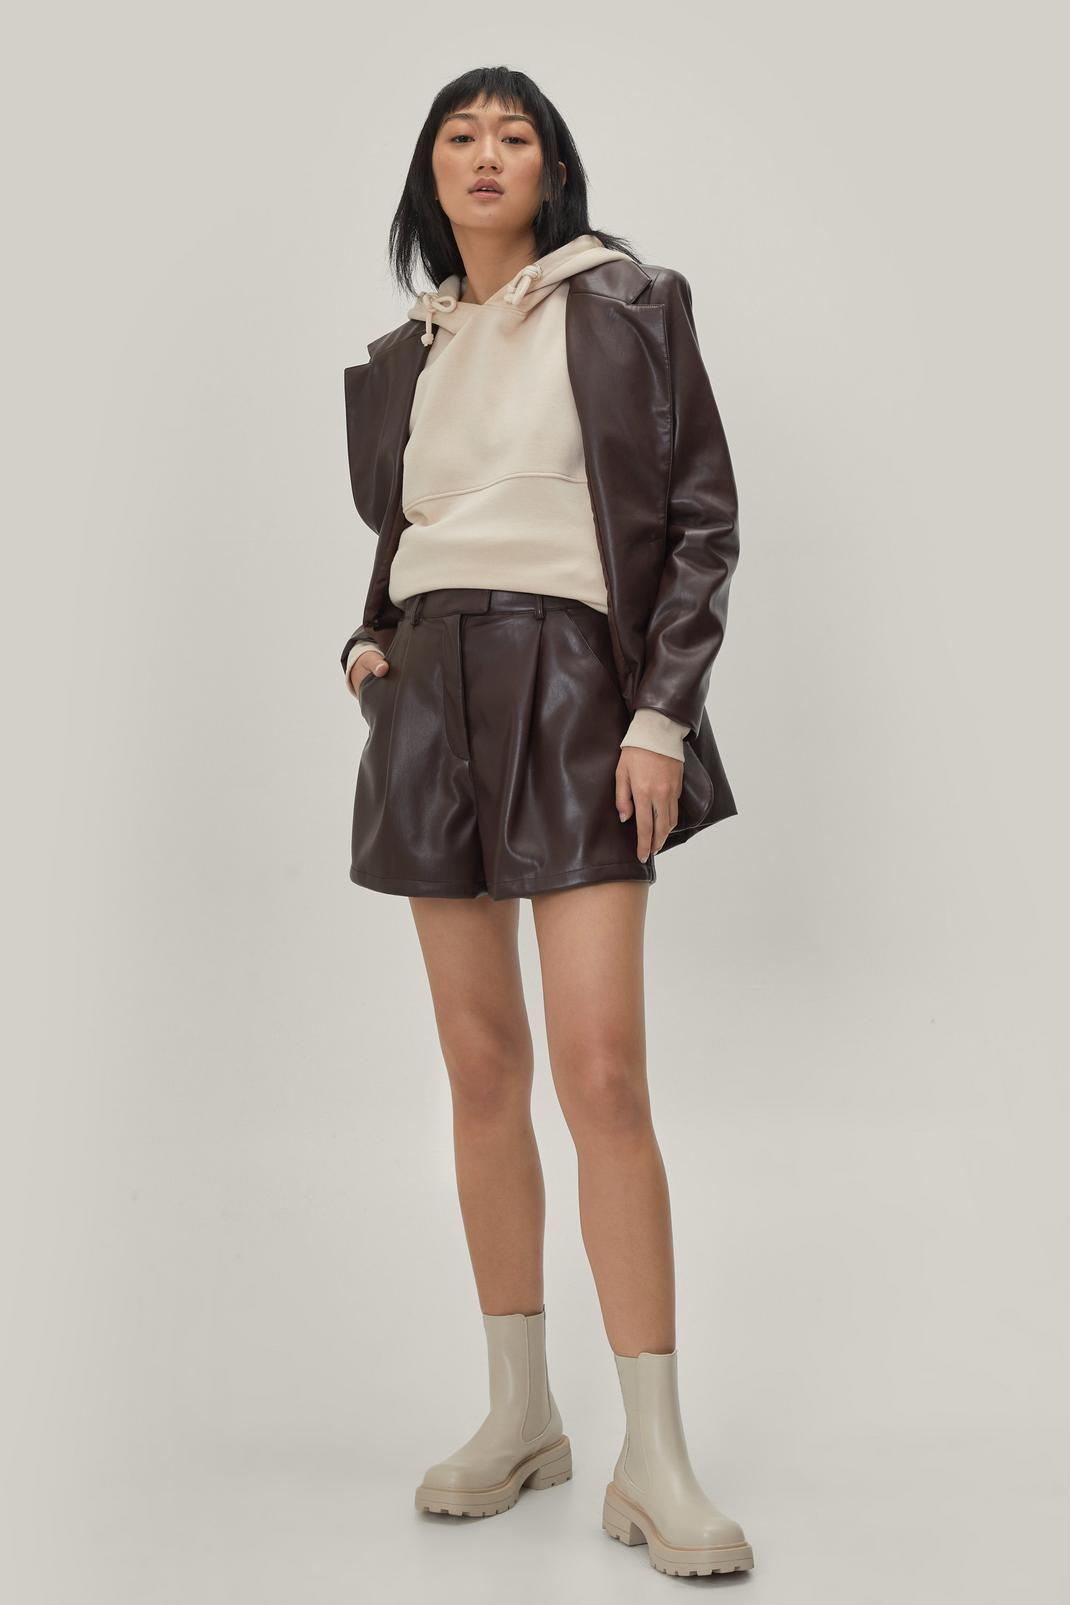 https://media.nastygal.com/i/nastygal/agg18580_chocolate_xl/female-chocolate-high-waisted-tailored-faux-leather-shorts/?w=1070&qlt=default&fmt.jp2.qlt=70&fmt=auto&sm=fit